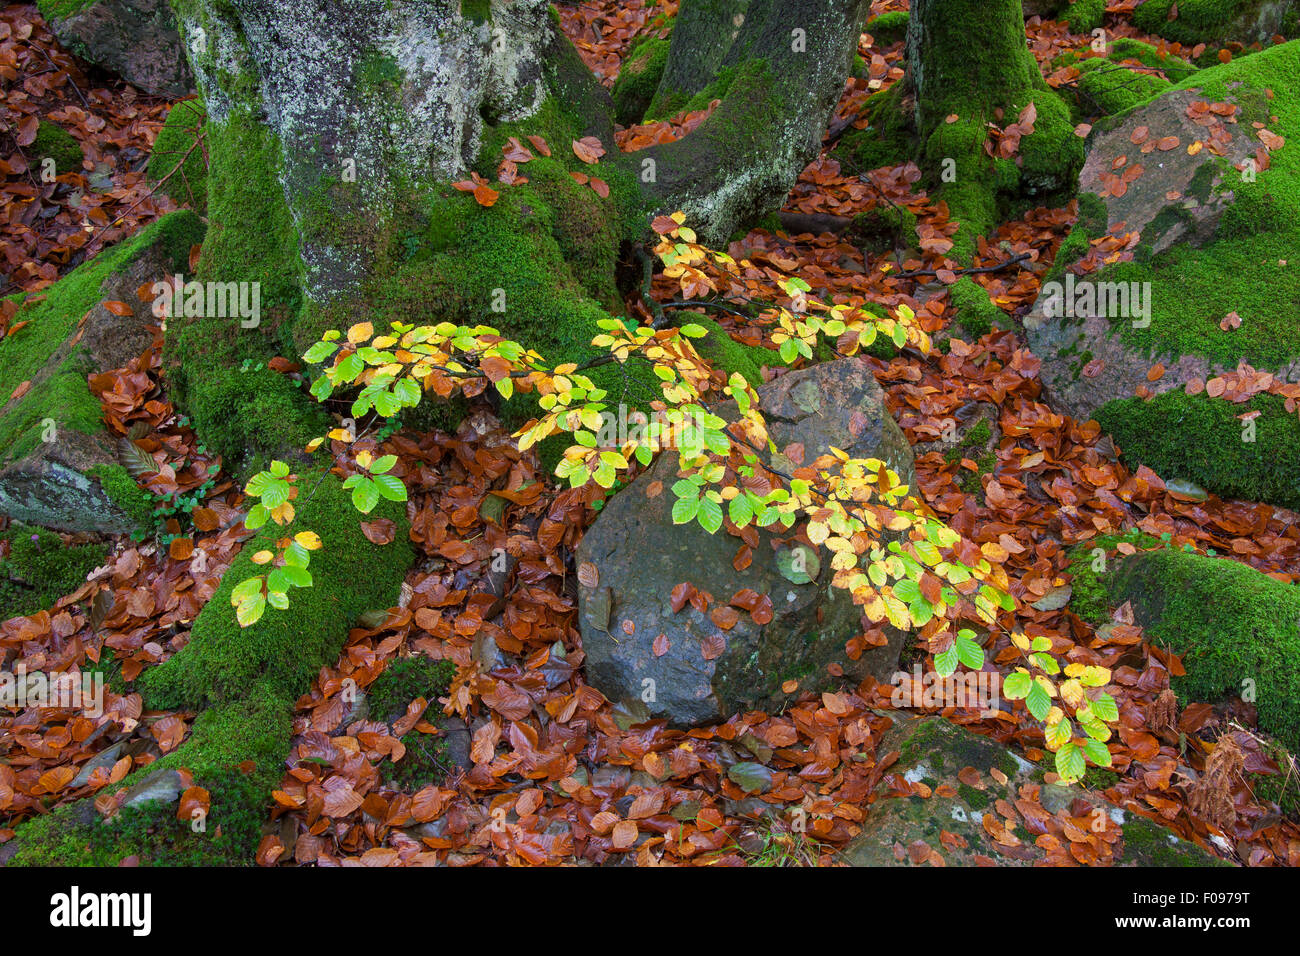 Common beech (Fagus sylvatica) tree leaves in autumn colours on the forest floor in woodland Stock Photo